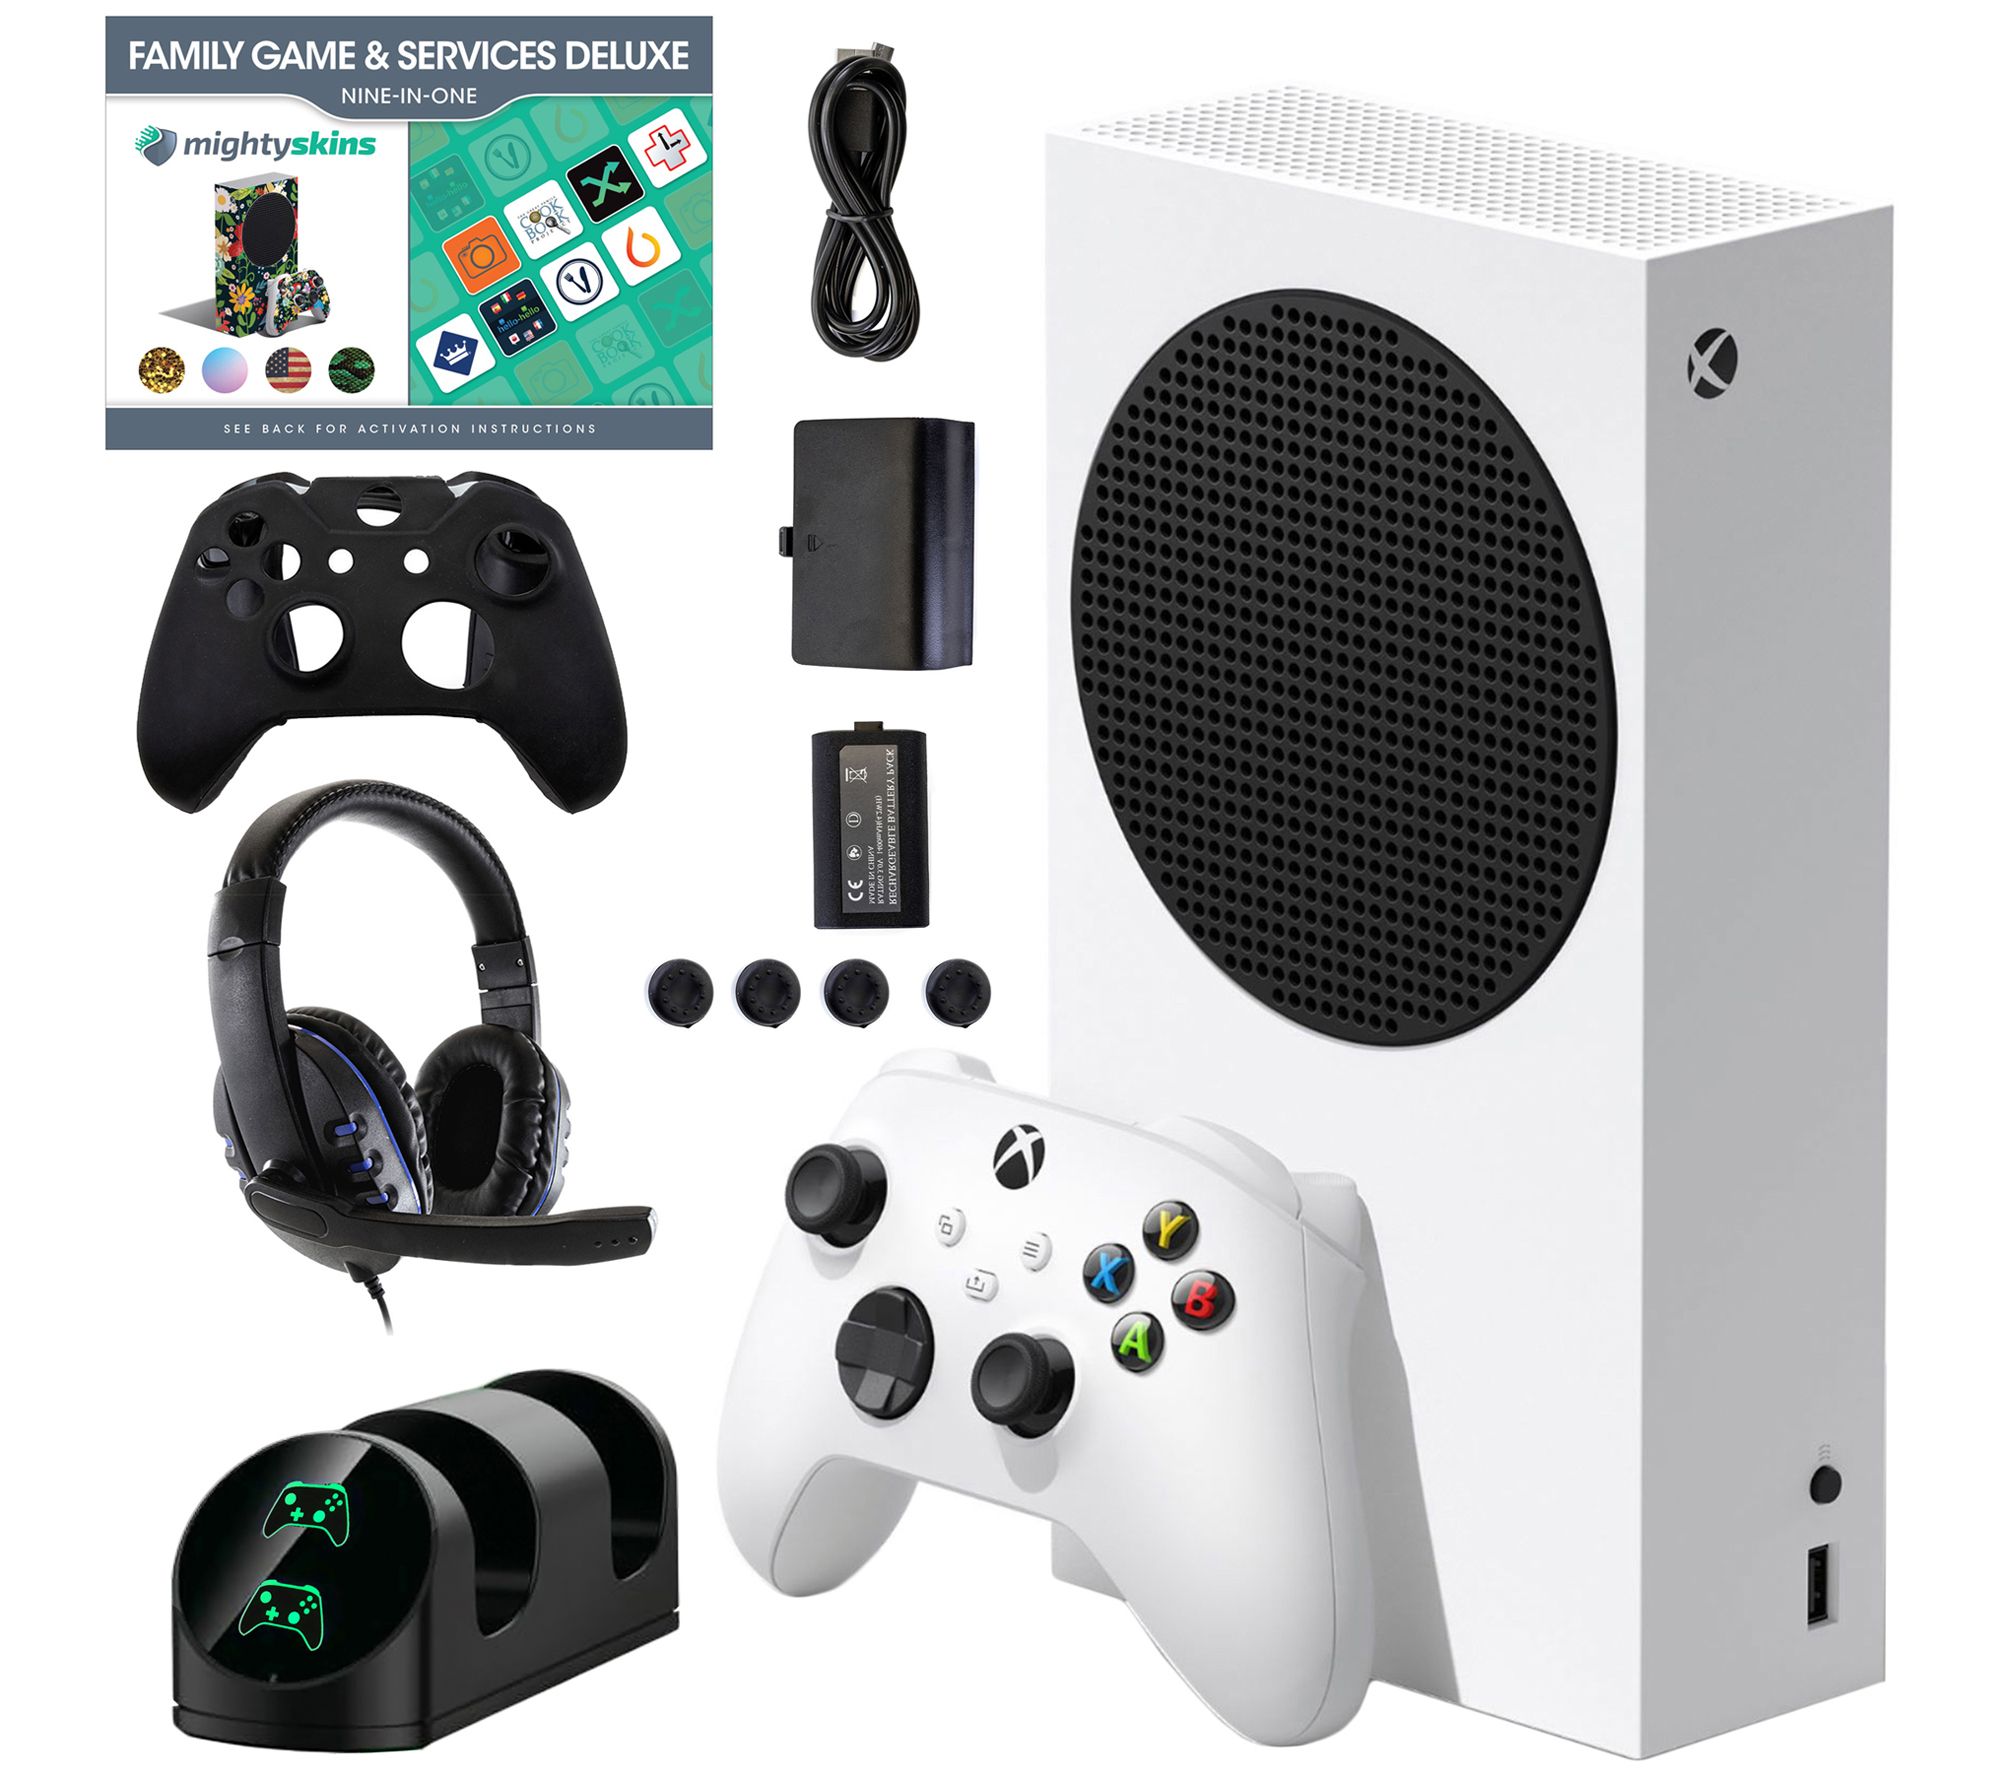 Xbox Series X 1TB Console with Accessories Kit and Mega Voucher